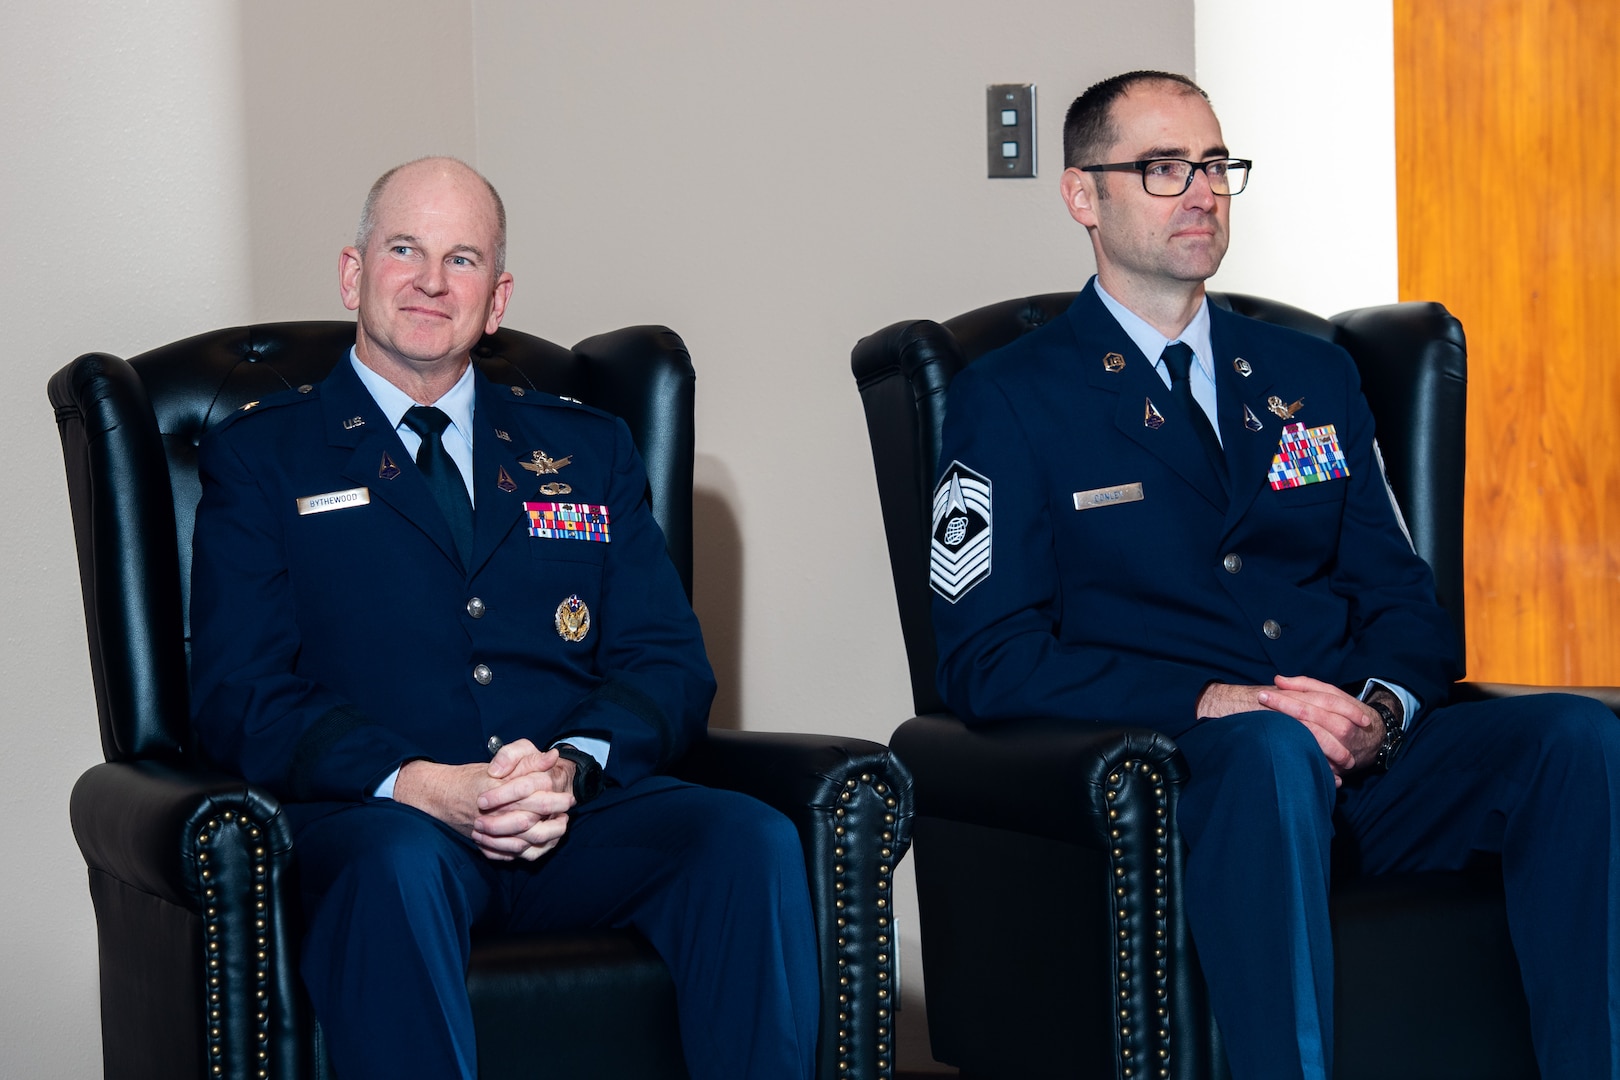 two service members sit next to each other in chairs